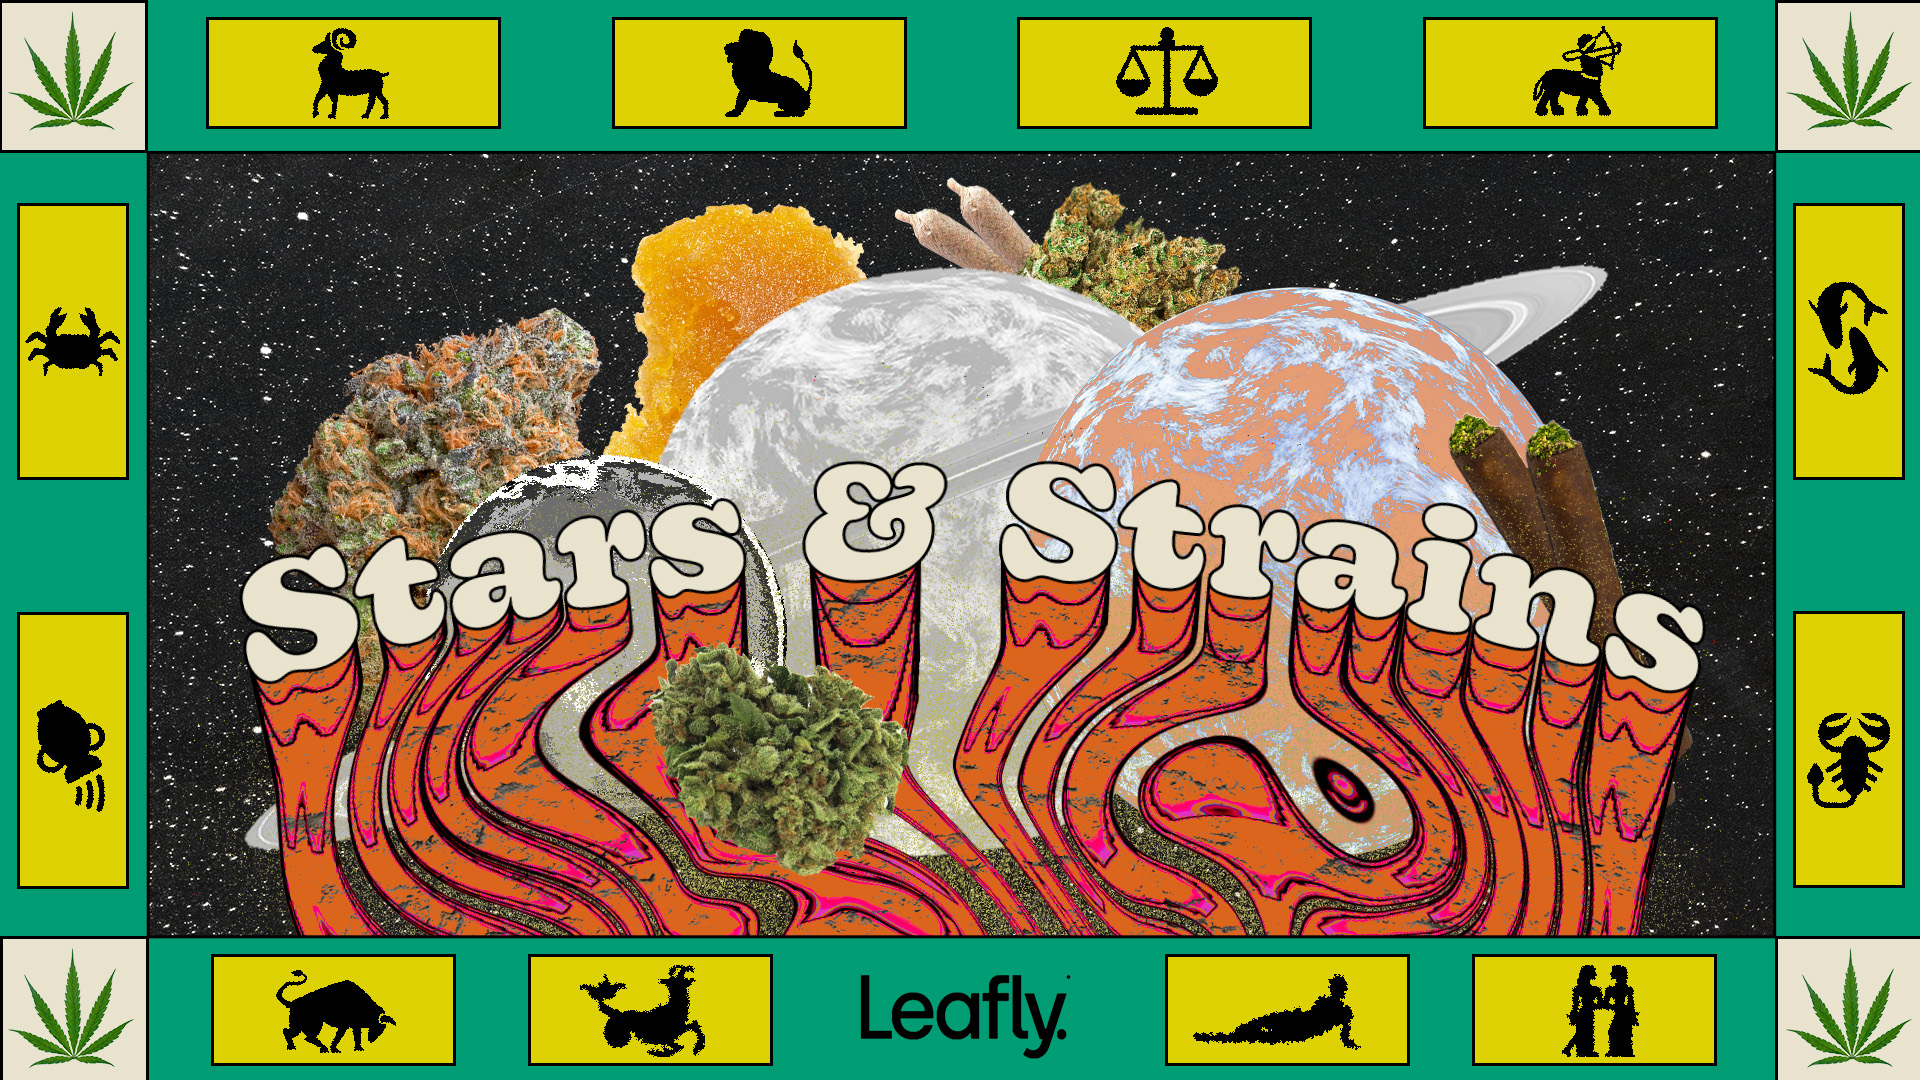 Star signs and cannabis strains: March 2022 horoscopes